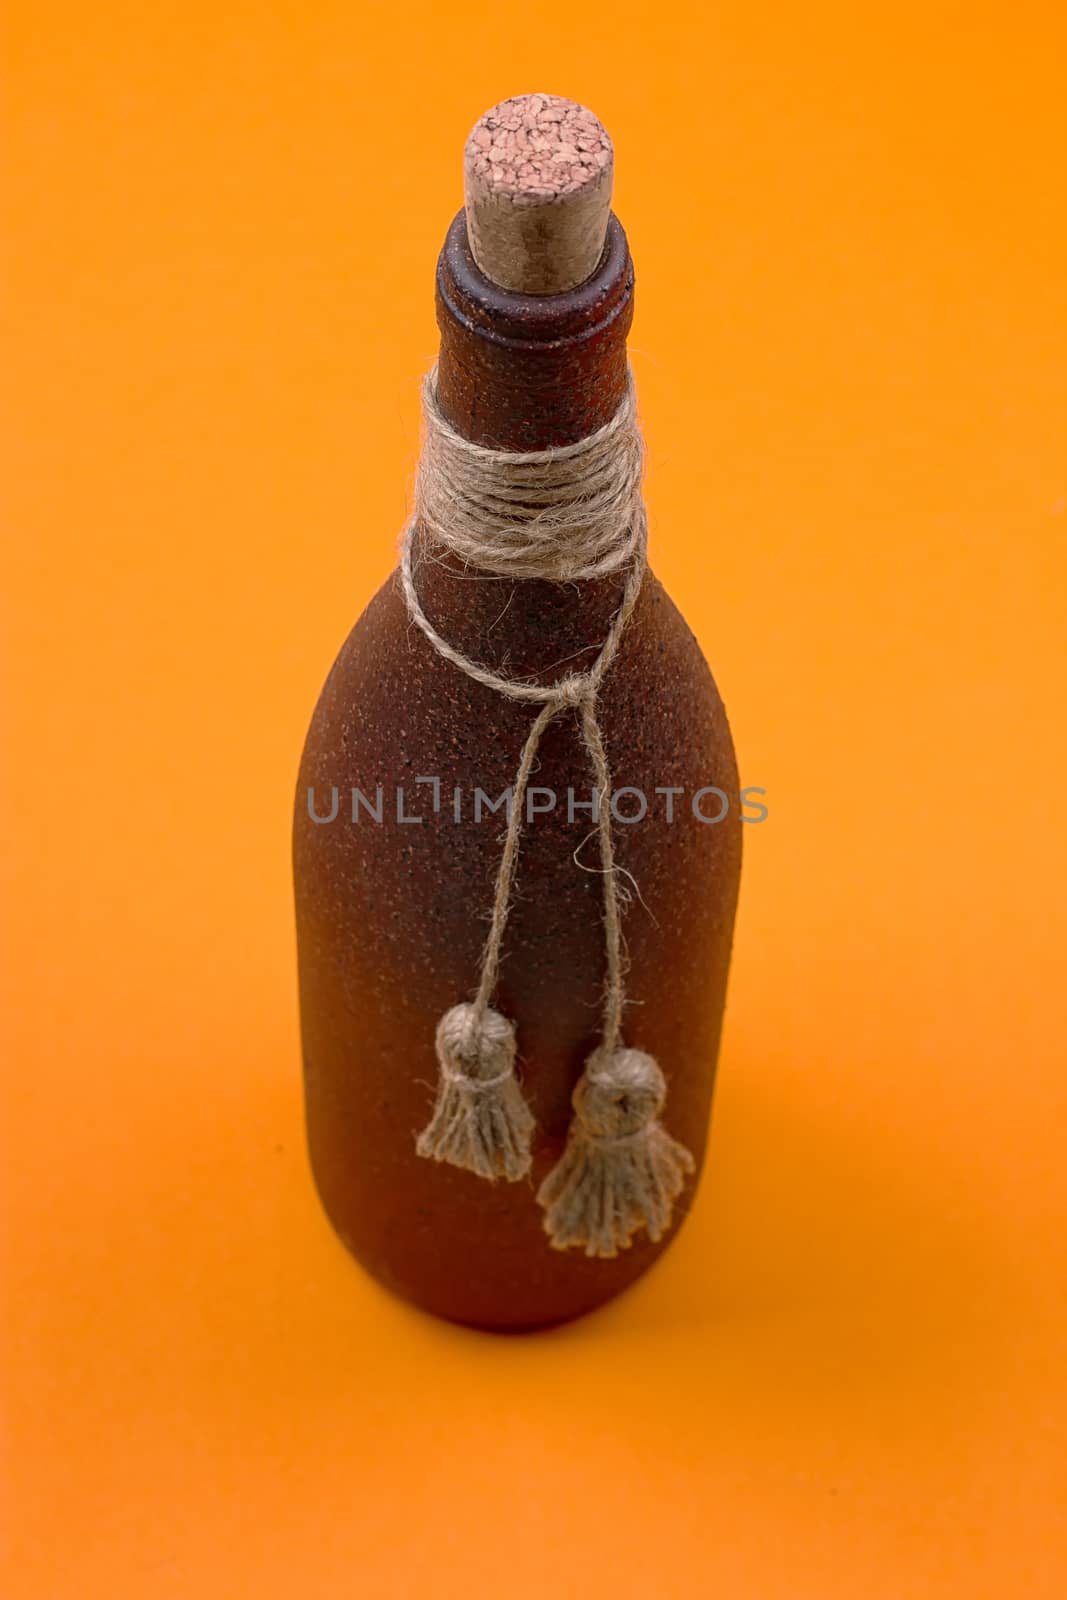 brown bottle made of stone on an orange background